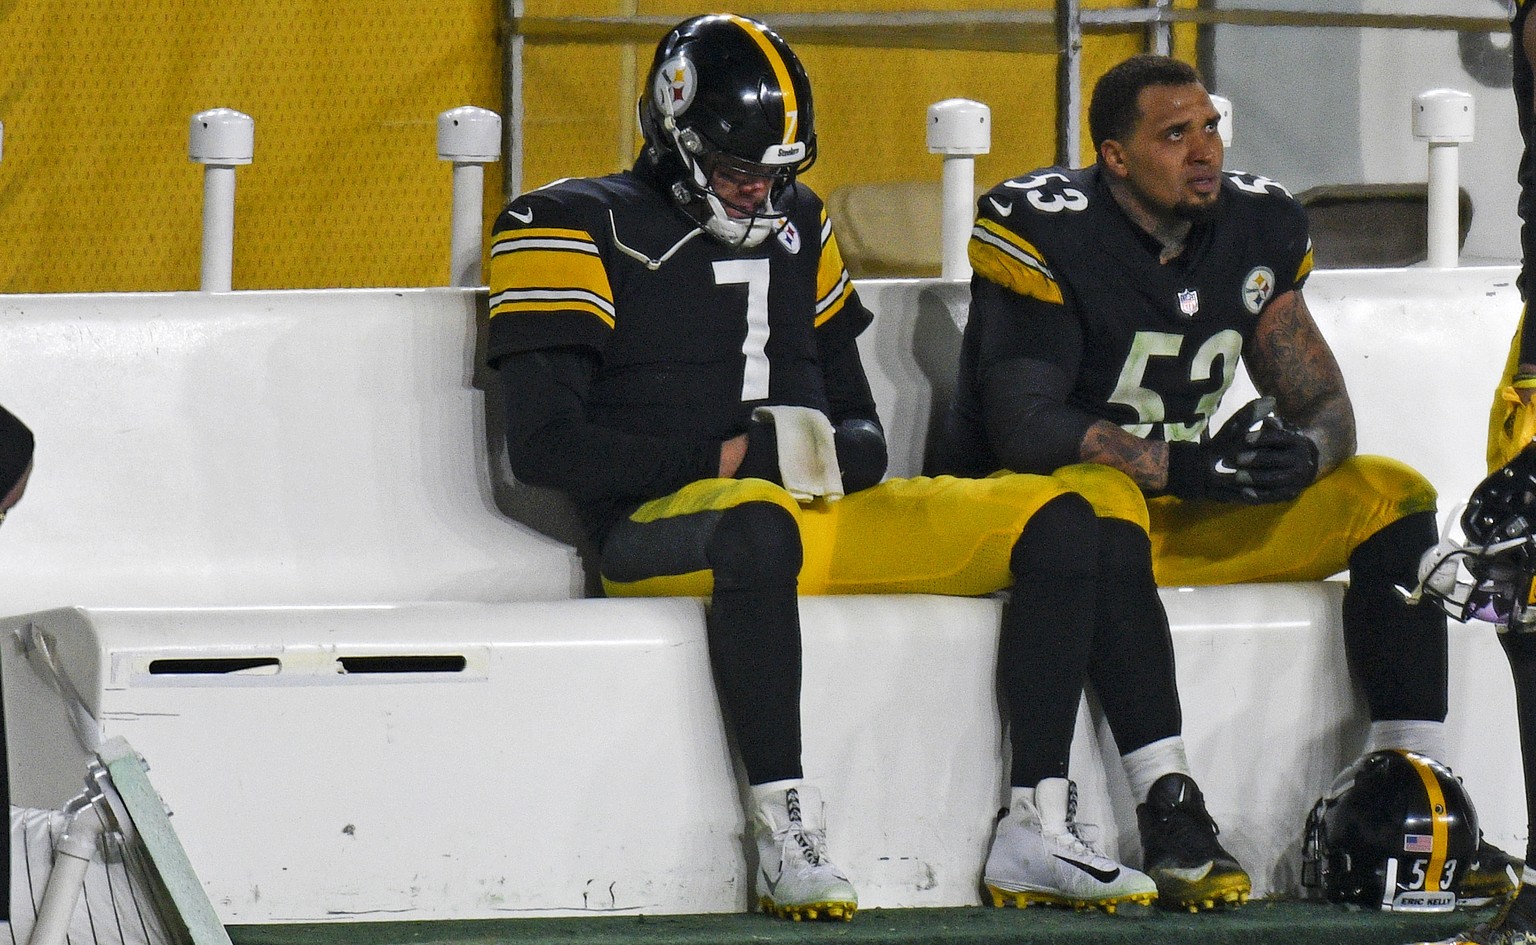 Pittsburgh Steelers quarterback Ben Roethlisberger (7) sits on the bench next to center Maurkice Pouncey (53) following a 48-37 loss to the Cleveland Browns in an NFL wild-card playoff football game i ...